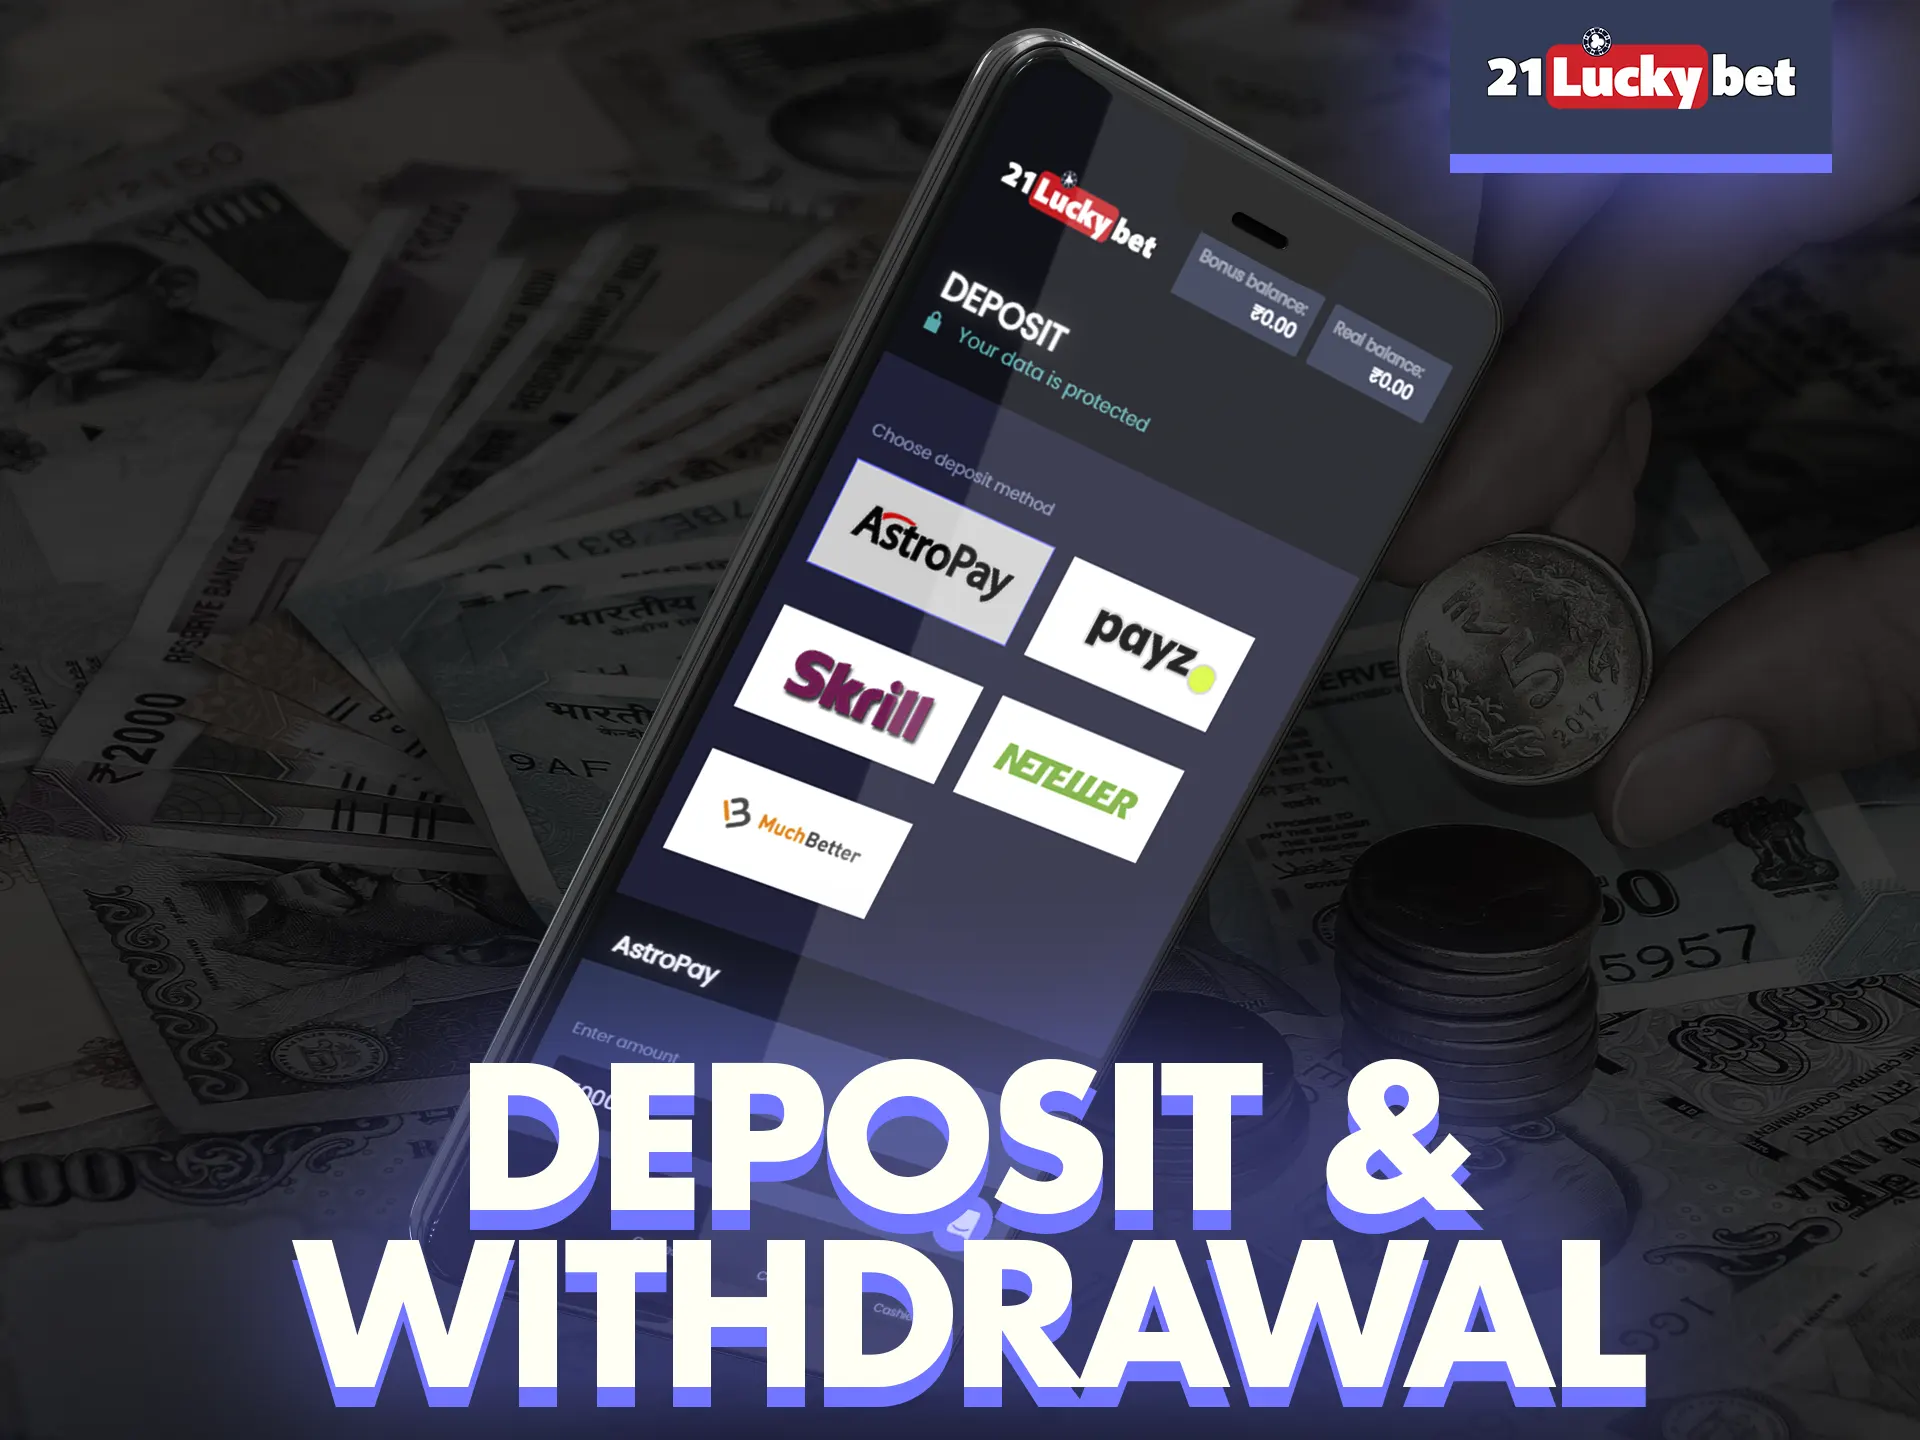 At 21luckybet app you have access to a variety of methods for deposits and withdrawals.